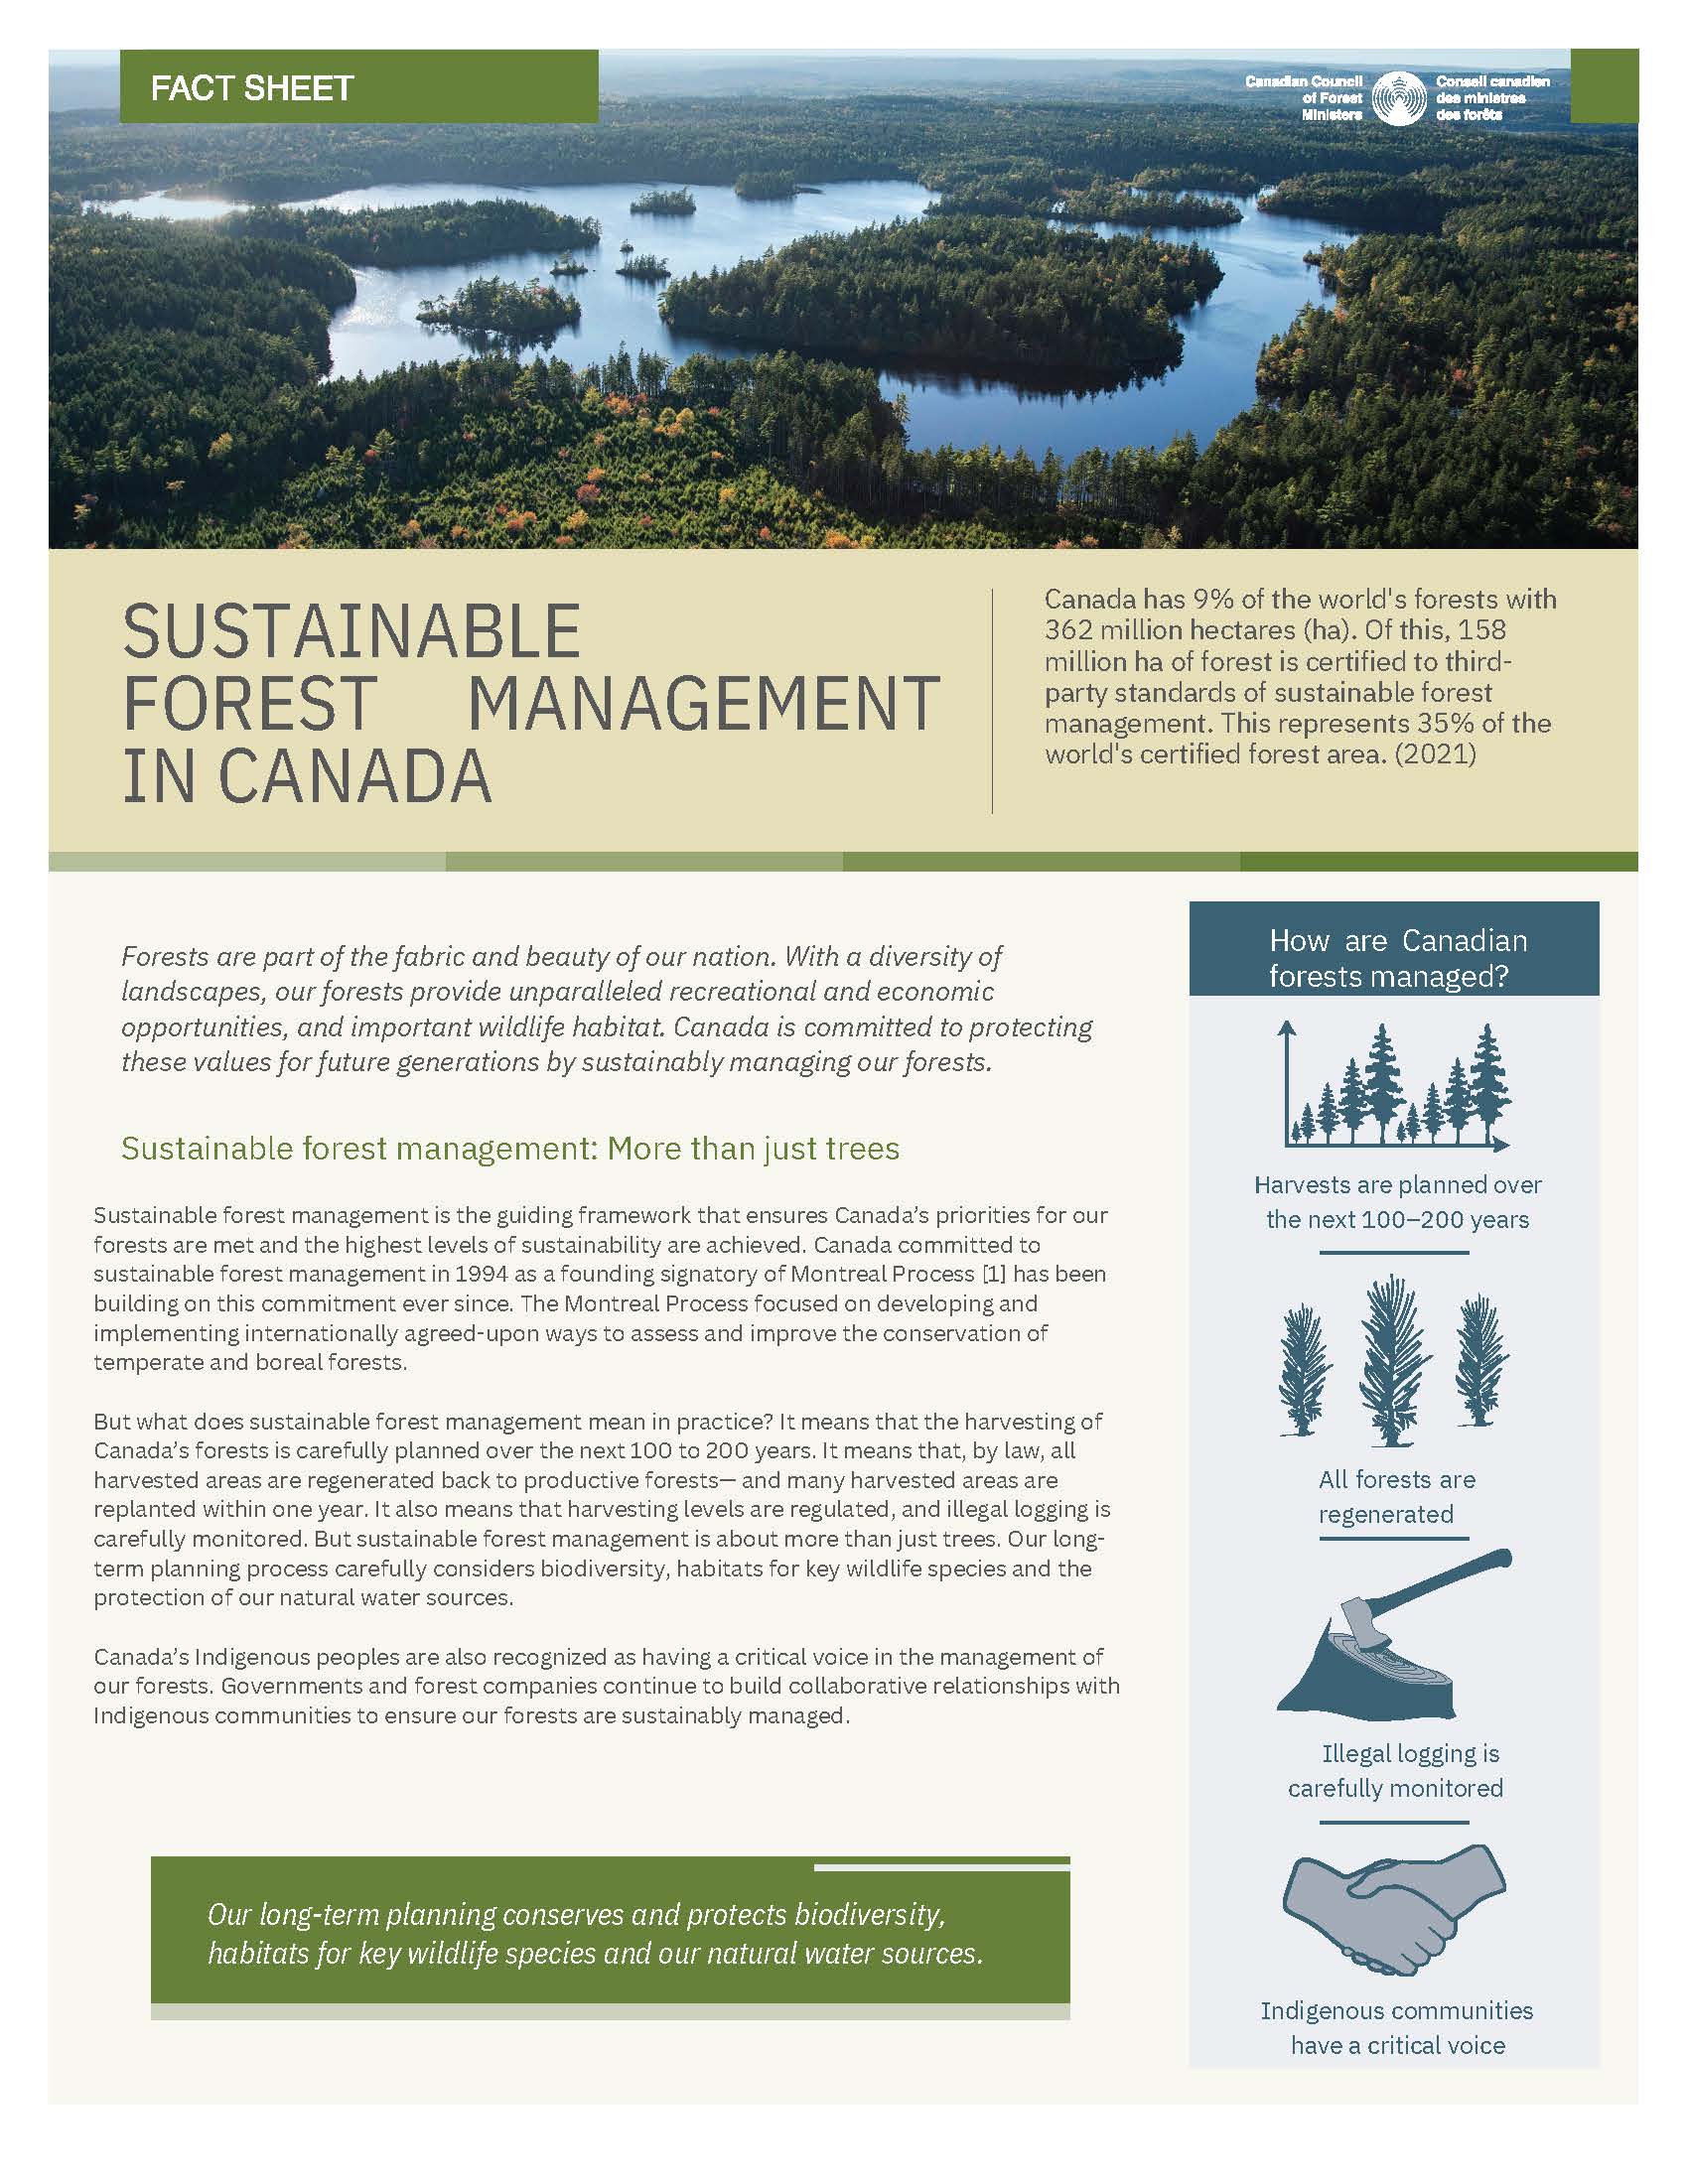 Sustainable forest management in Canada